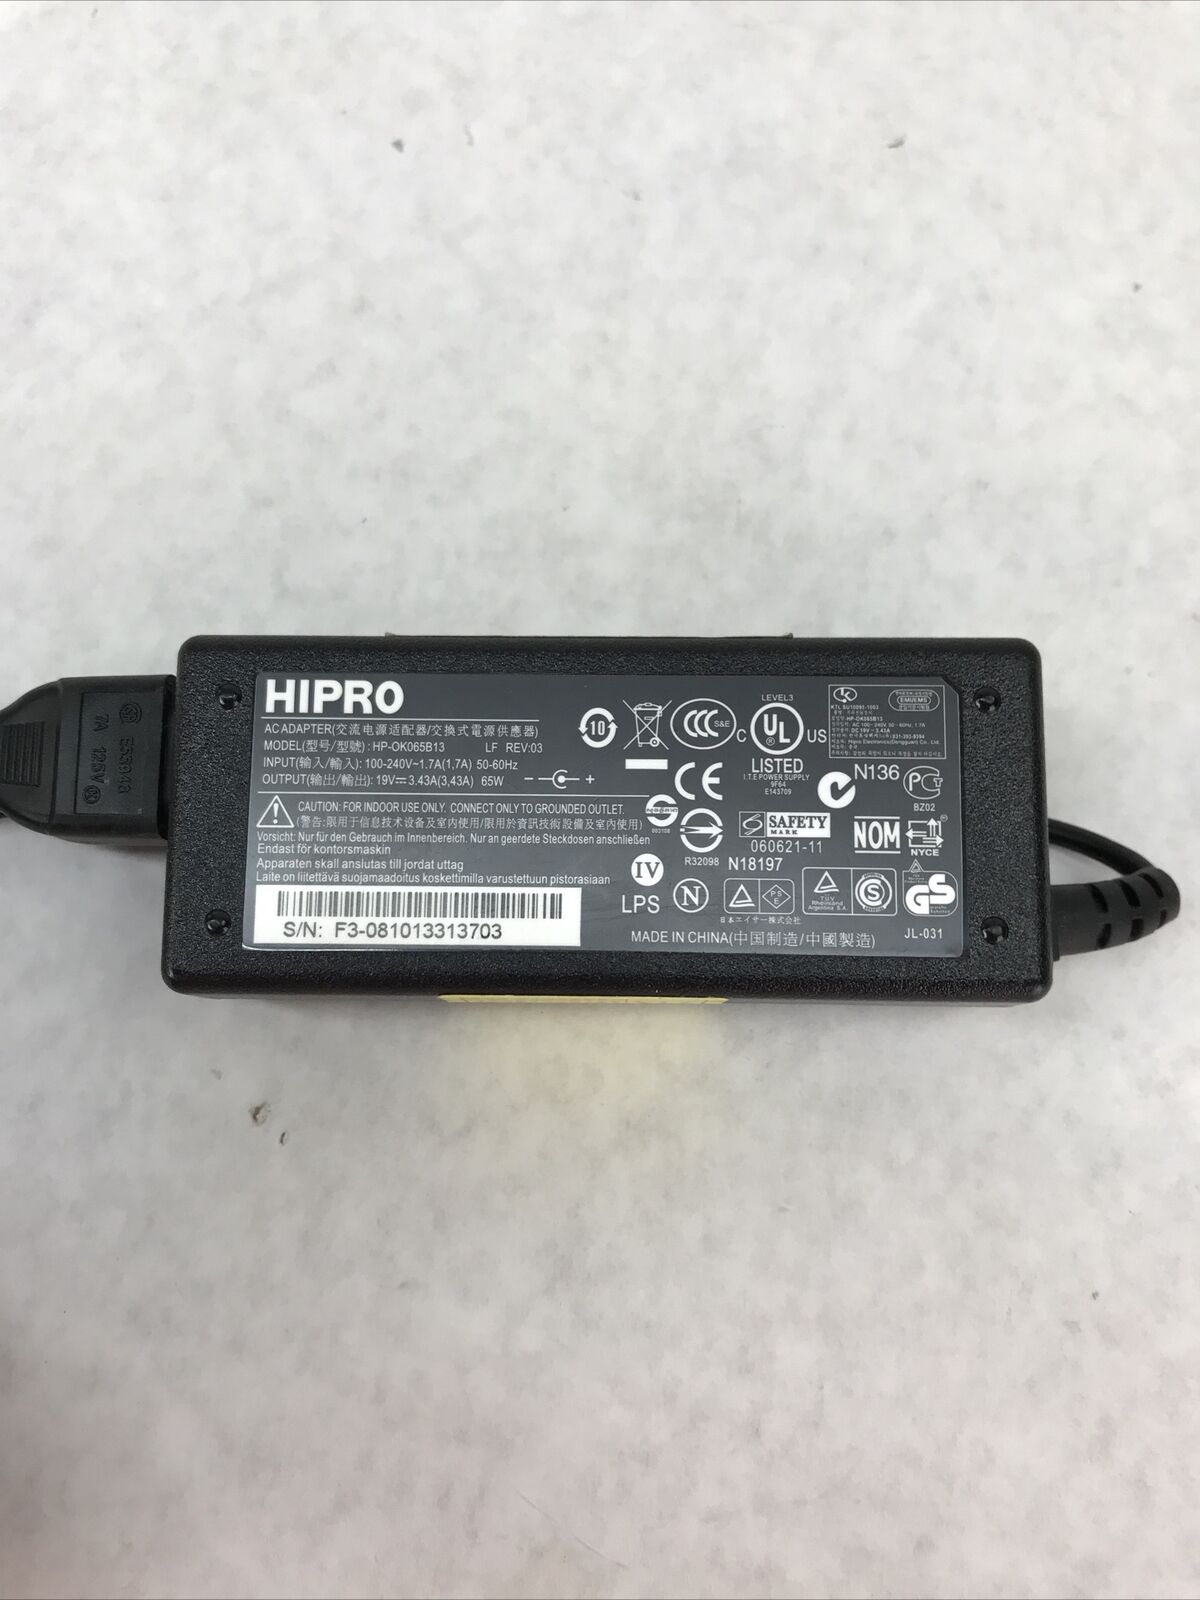 Genuine HIPRO HP-OK065B1 AC Power Adapter for Acer Laptop Charger 19V 3.43A 65W